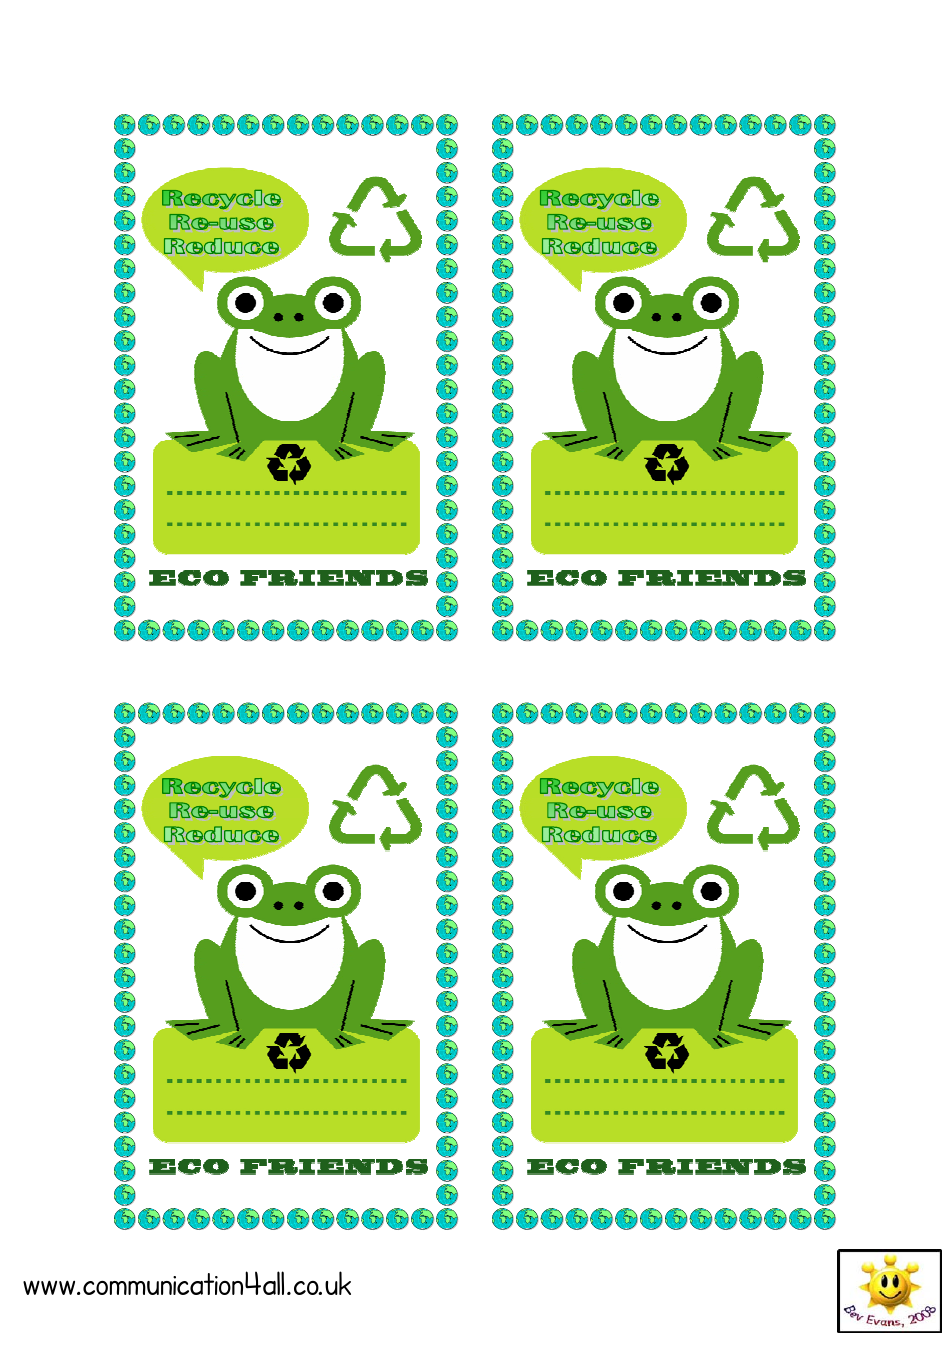 Recycling Tag Template - Downloadable and Printable Form